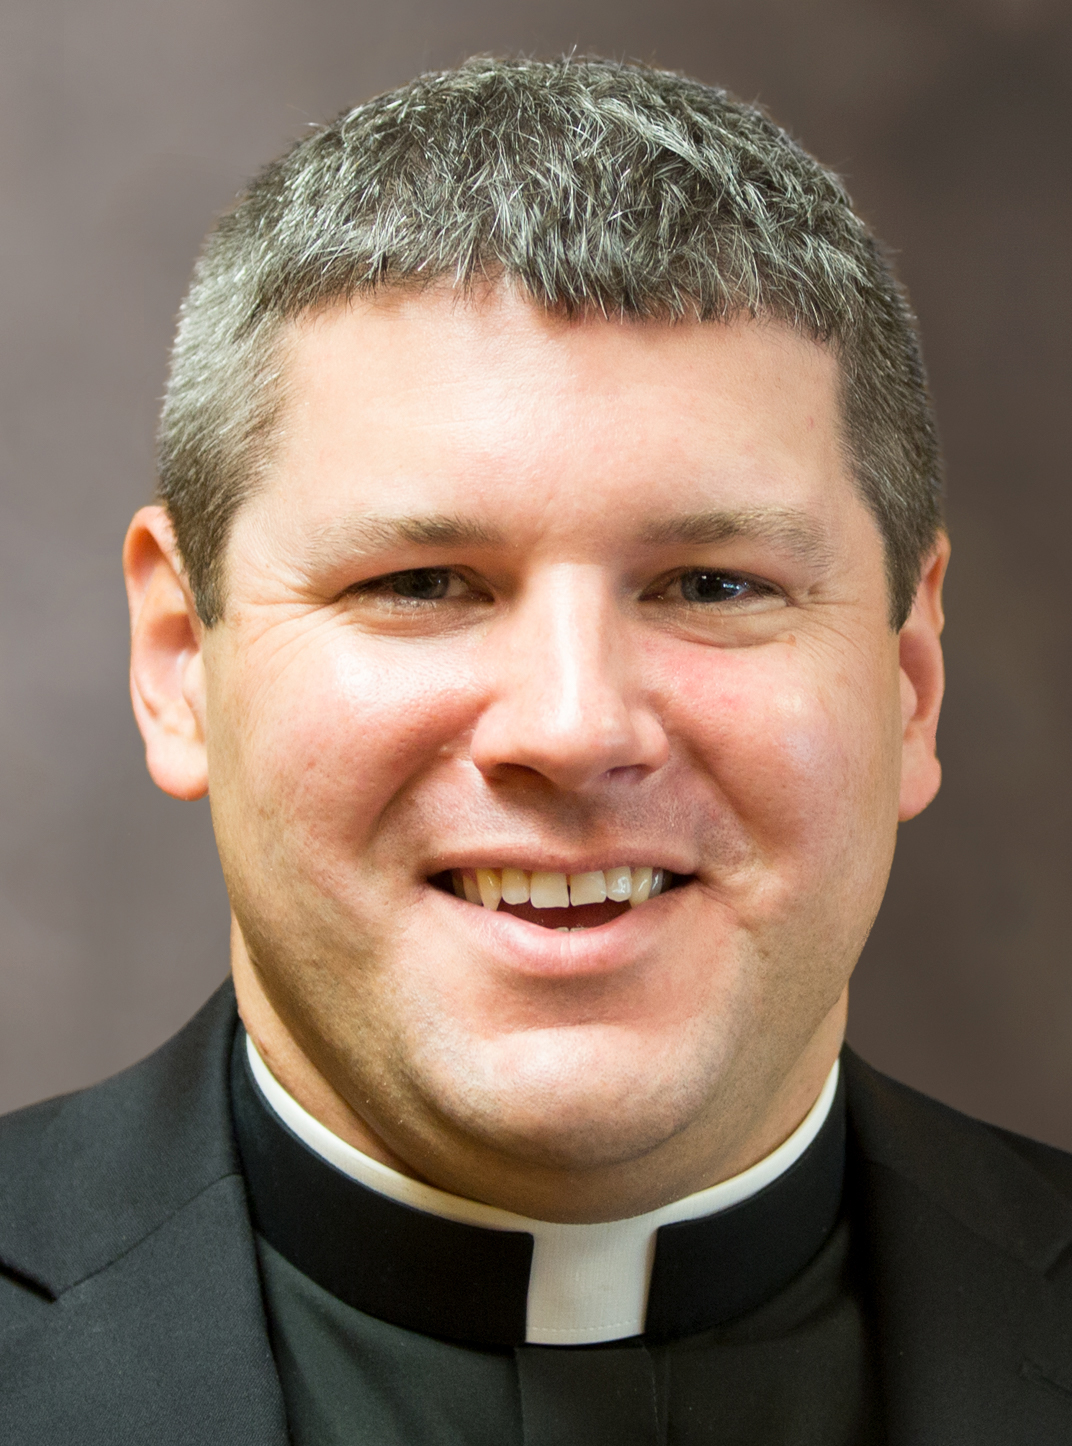 dubuque archdiocese priest assignments 2022